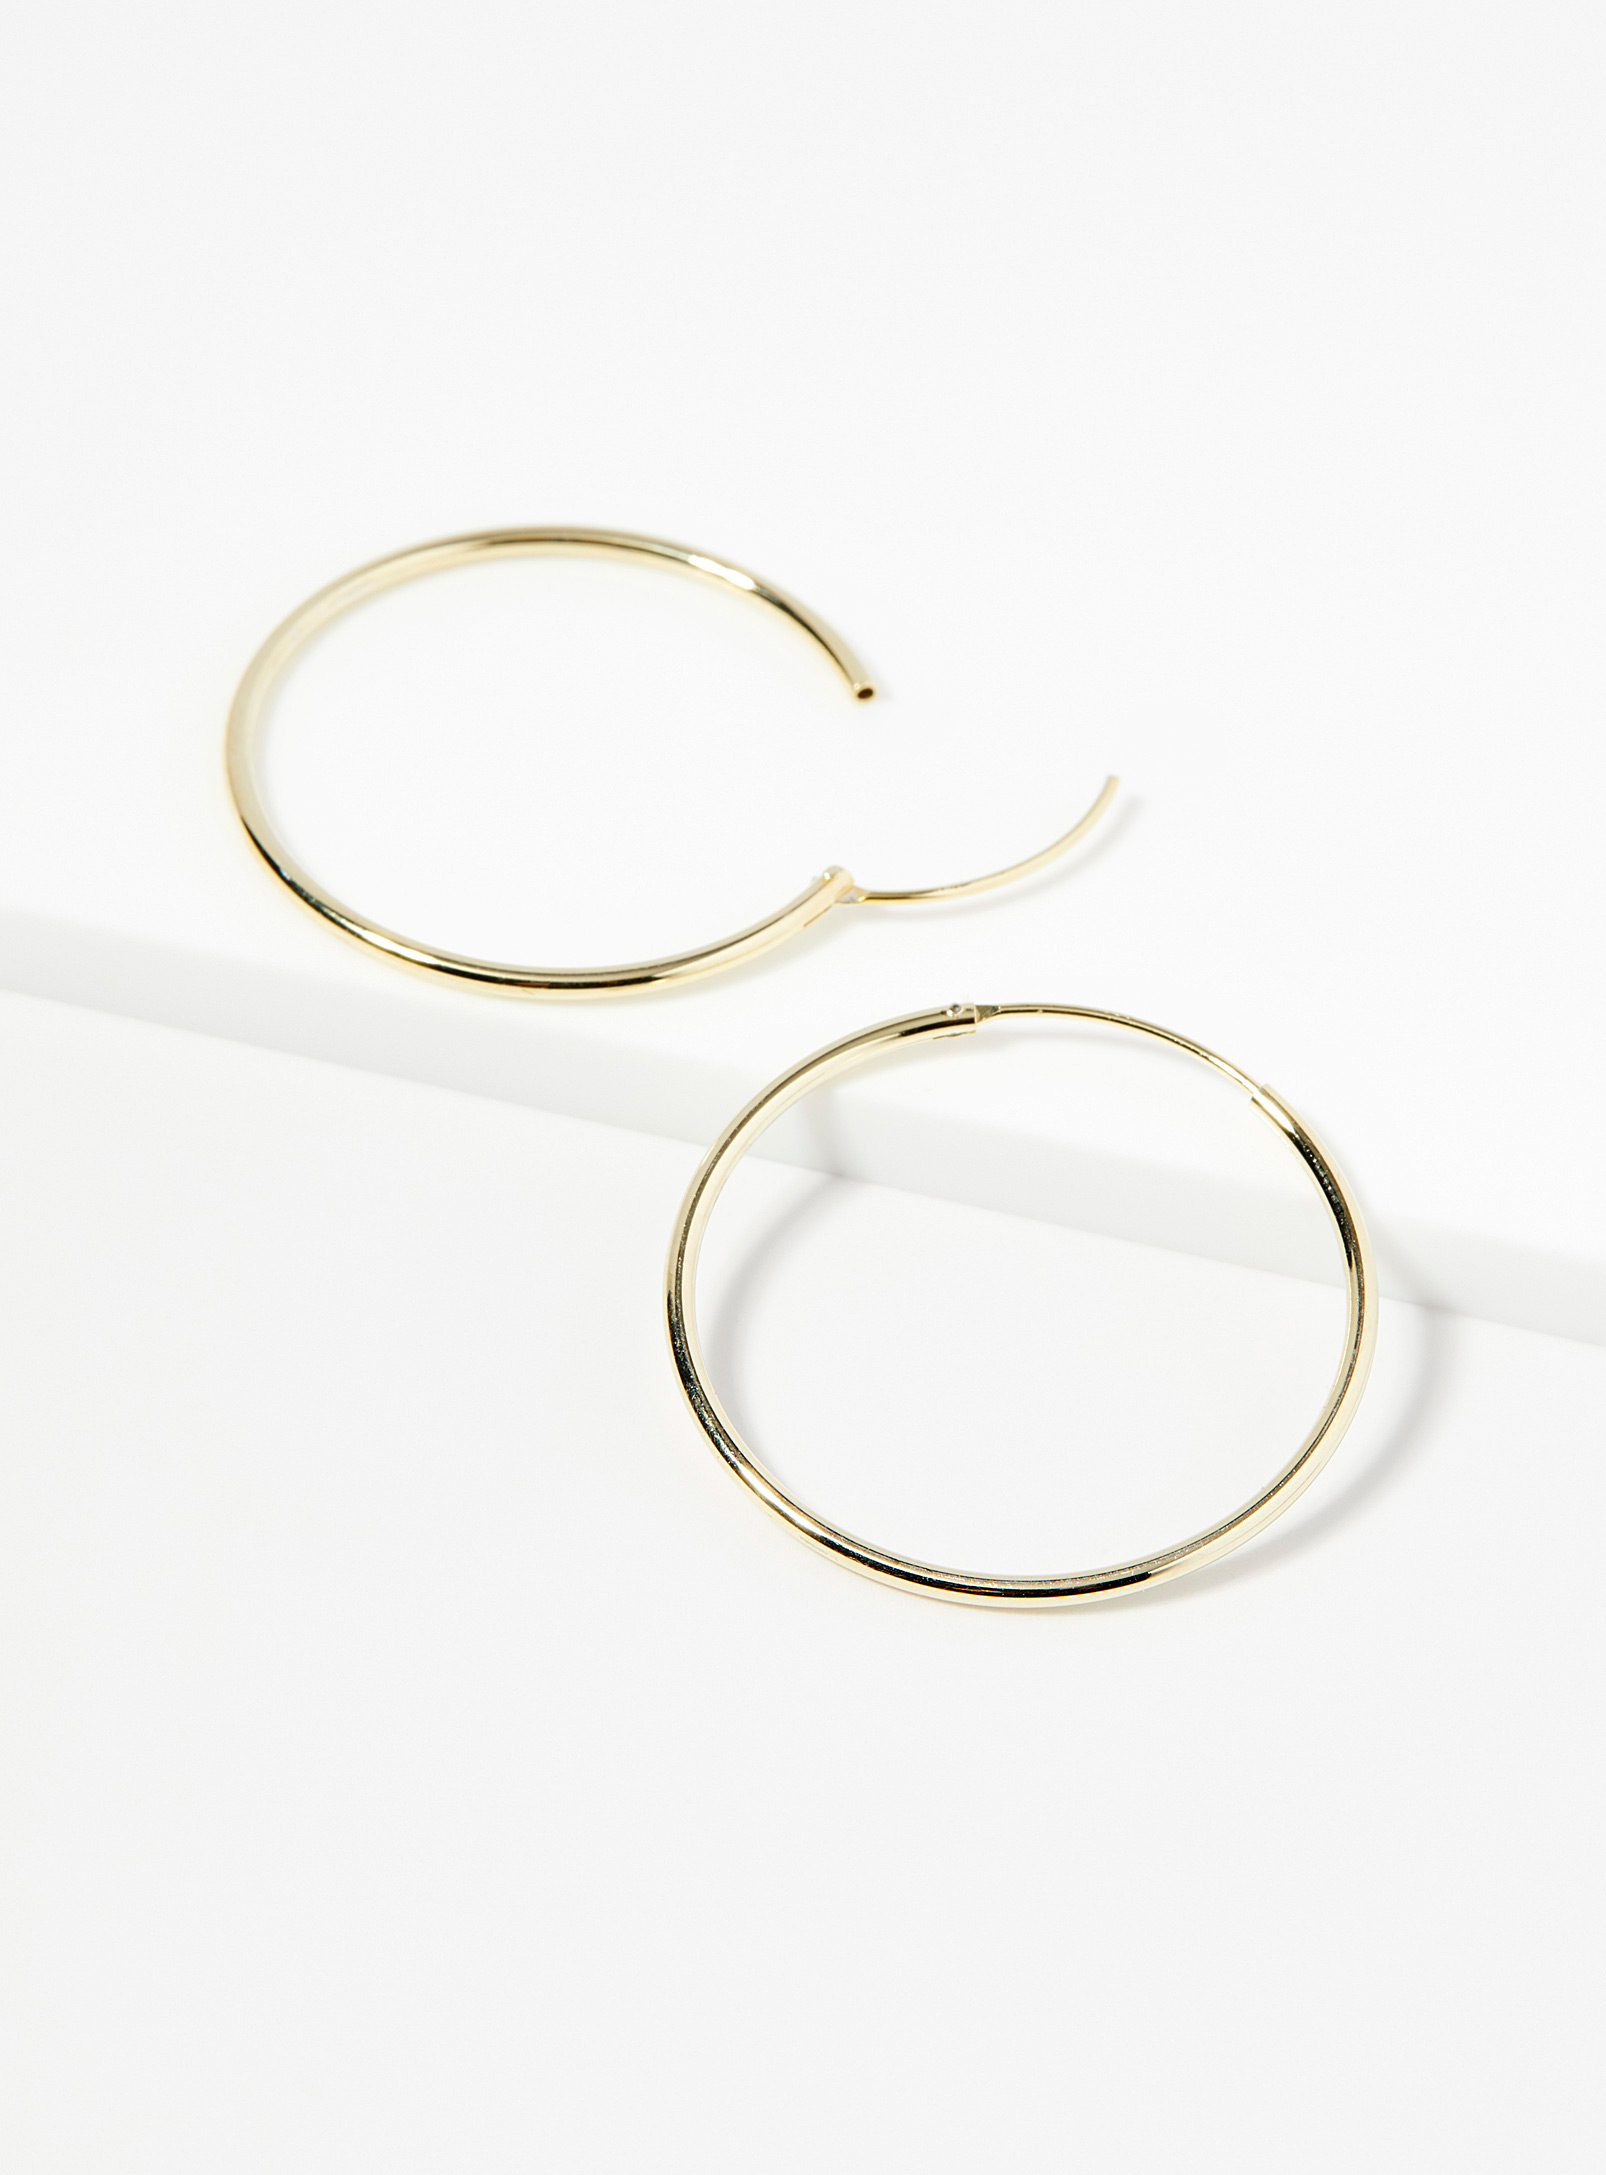 Midi34 X Simons Les Florence Hoops In Golden Yellow